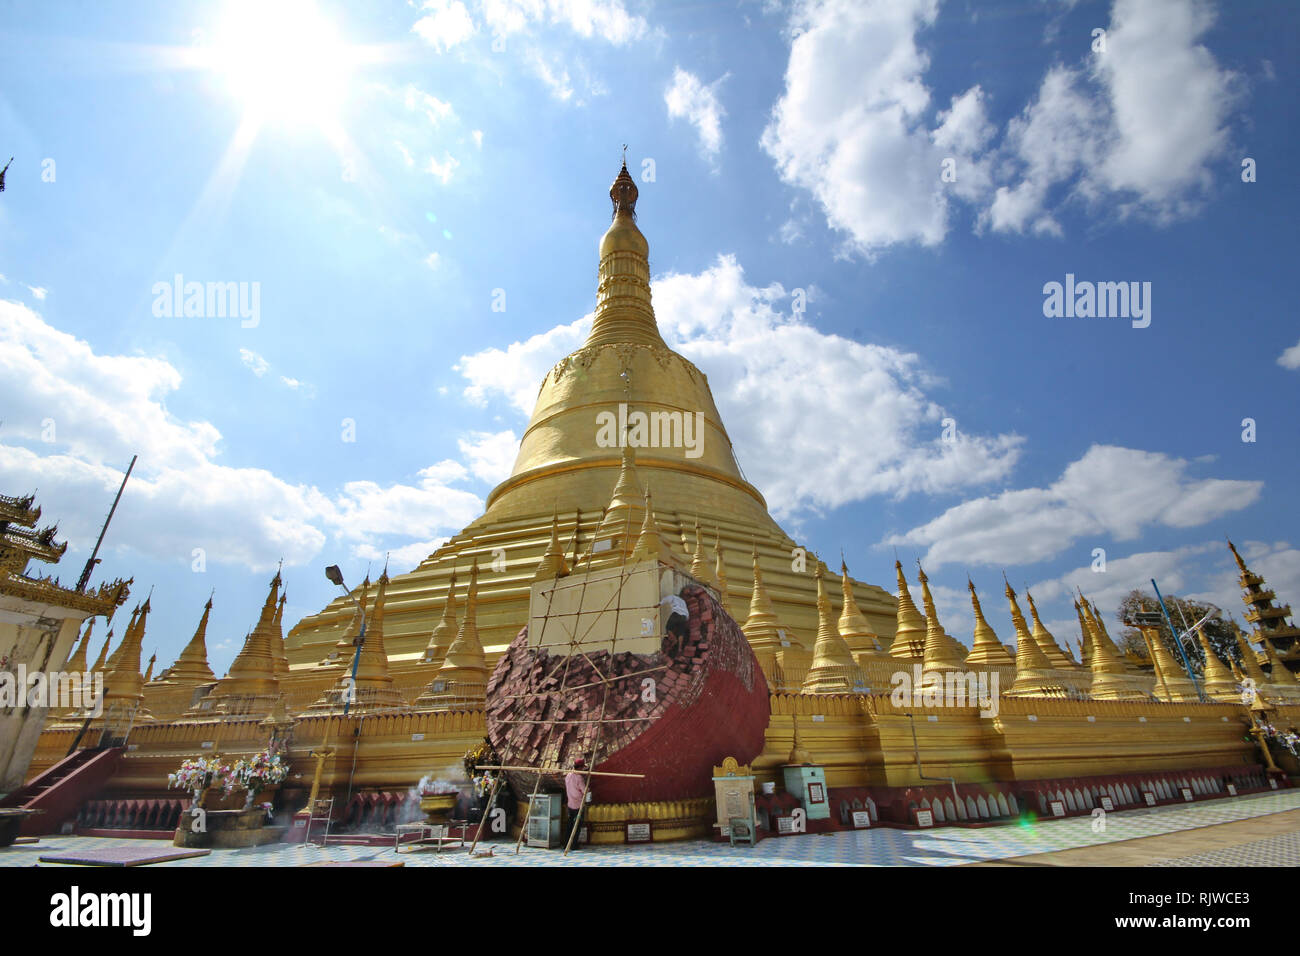 Bago, Myanmar,Feb 2,2018, Take photo the Shwemawdaw Pagoda ,the tallest pagoda in Myanmar, referred to as the Golden God Temple Stock Photo